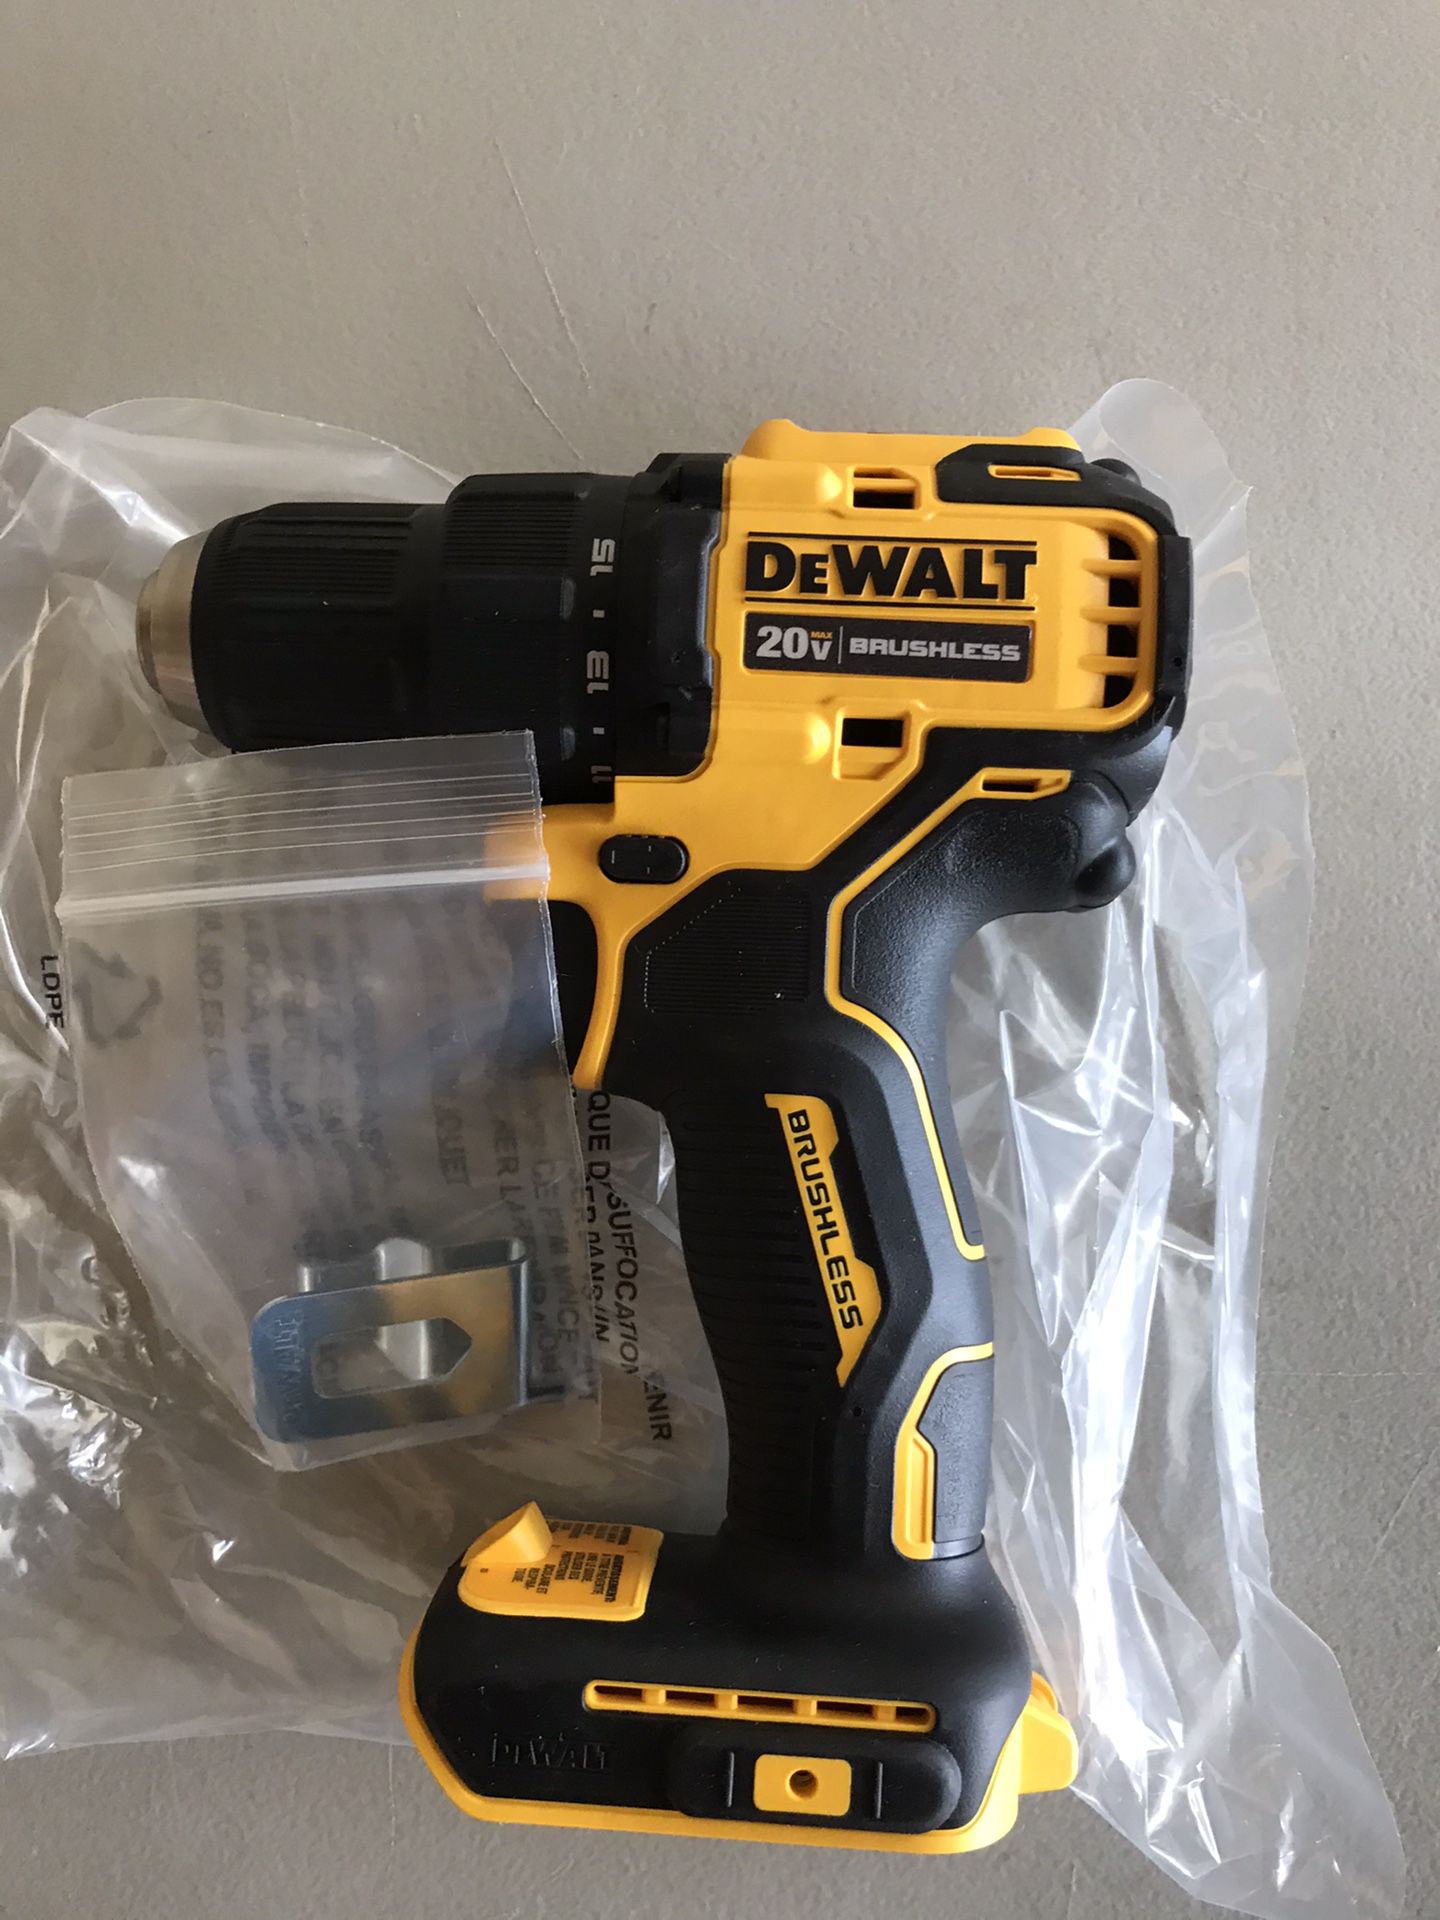 Brand new DeWalt Brushless 20v 1/2” drill. Tool only. Check out my other items for sale. Pick up in Lombard